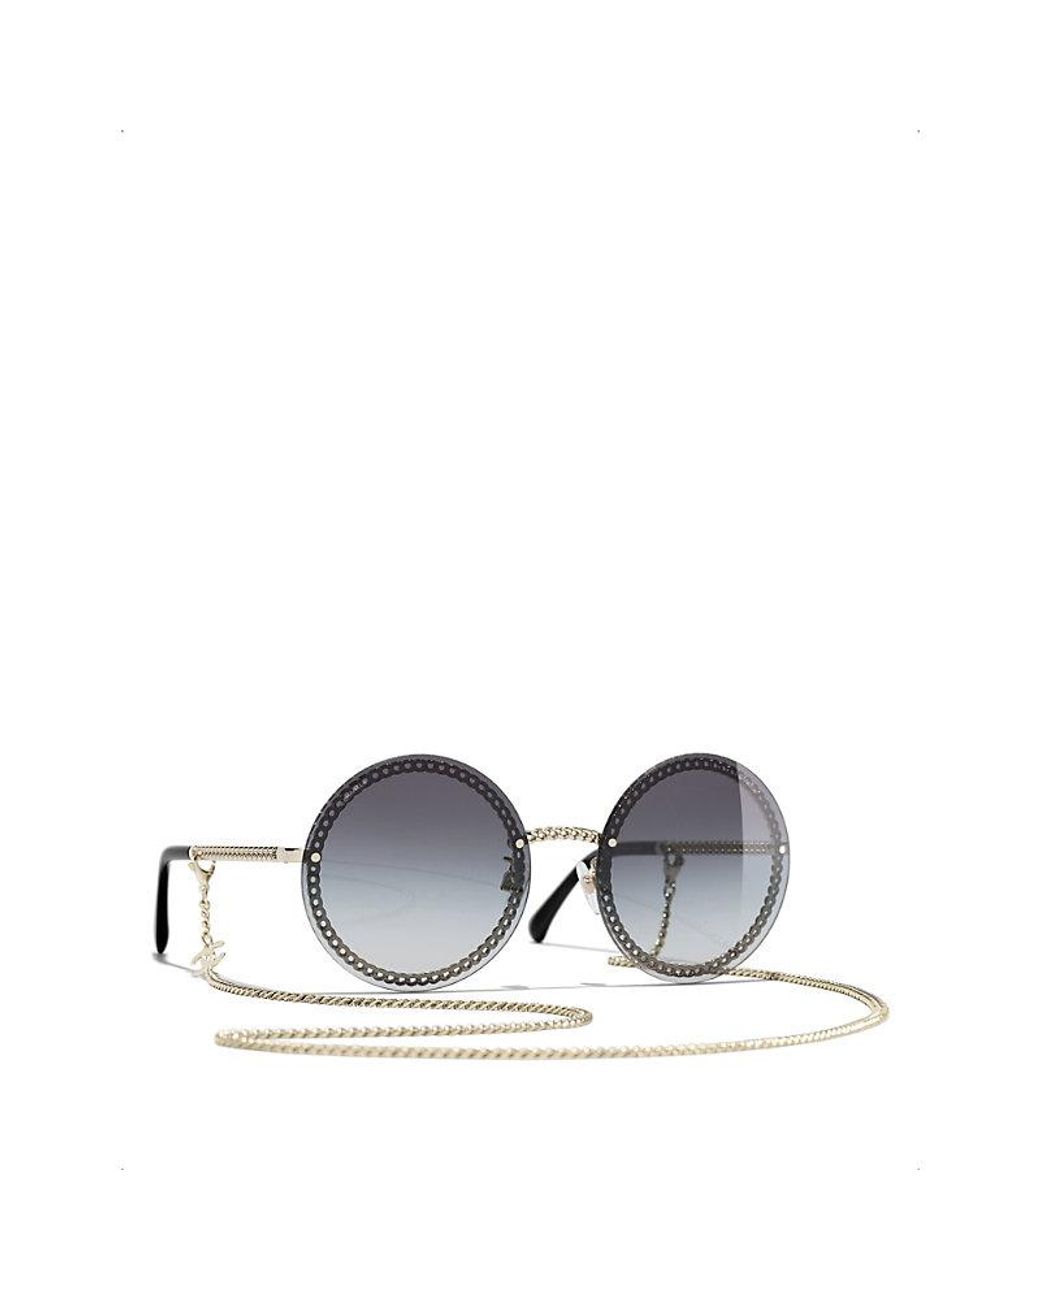 Chanel Round Sunglasses in Gray | Lyst